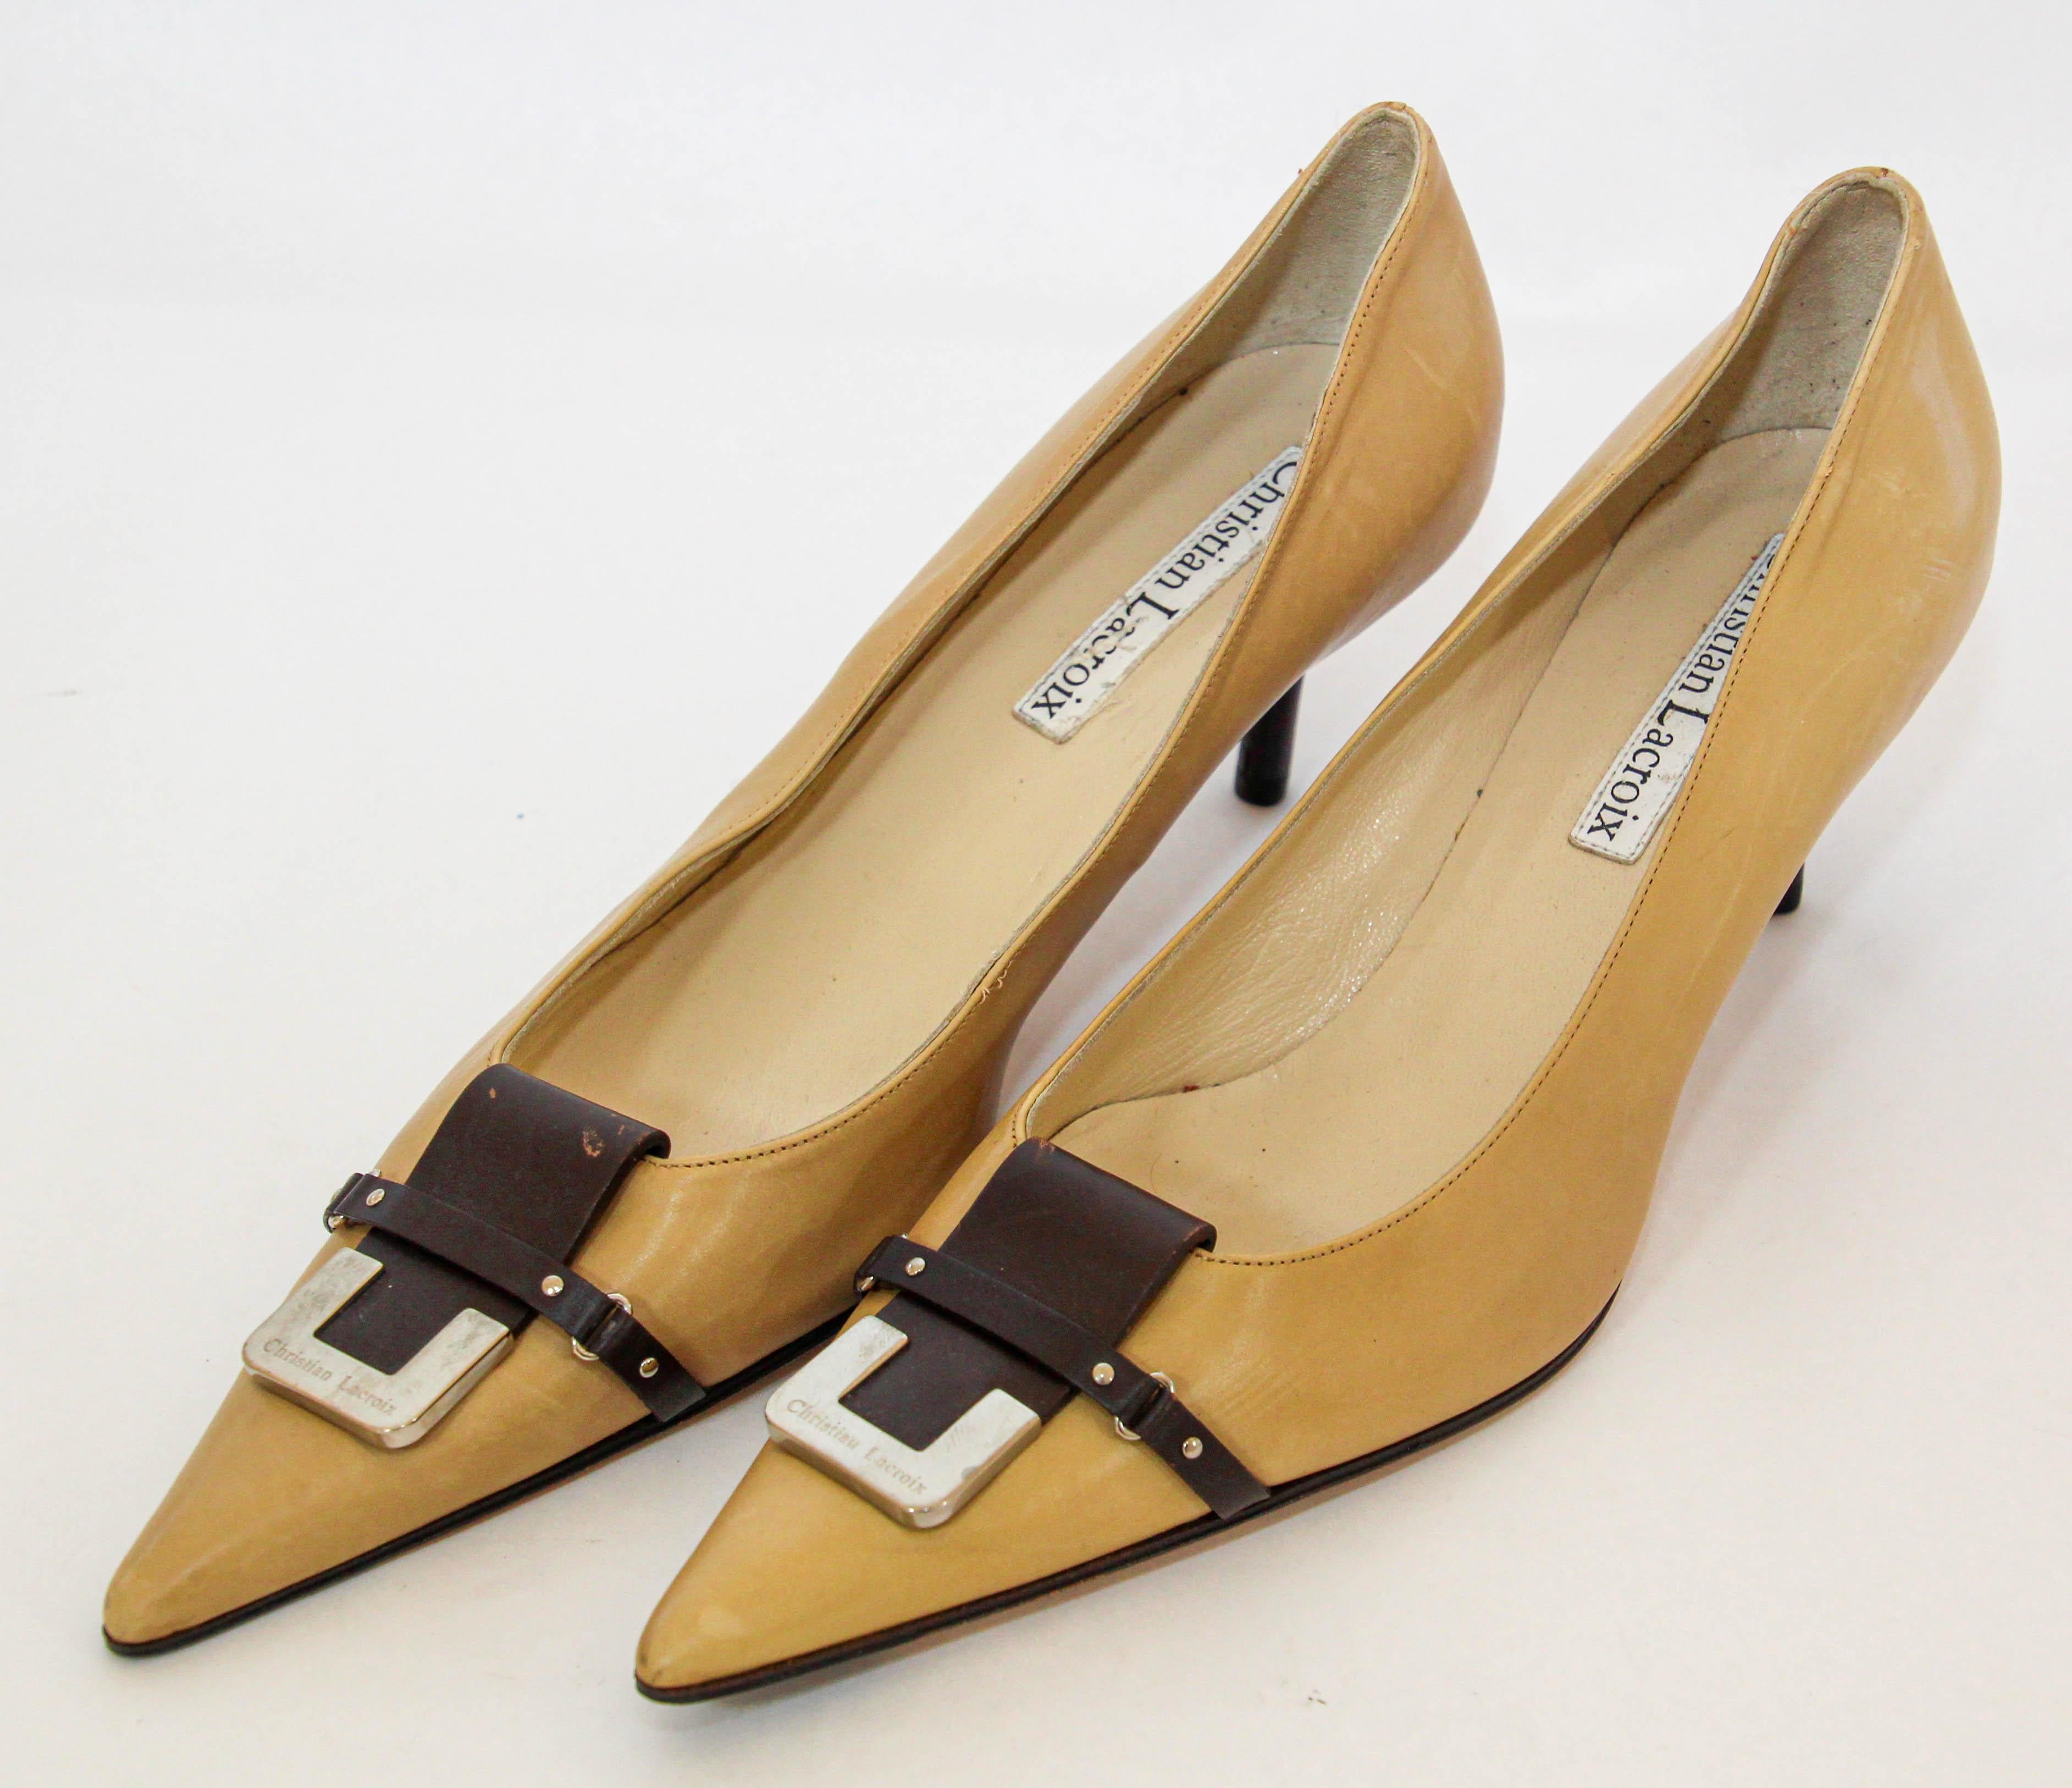 Christian Lacroix Paris Shoes Heels Tan and Brown Leather 1990s
Christian Lacroix Paris Shoes Kitten Heels. 1990s.
Gorgeous Christian Lacroix Paris France heels two tone beige nude tan and chocolate brown accent with branded metal buckle